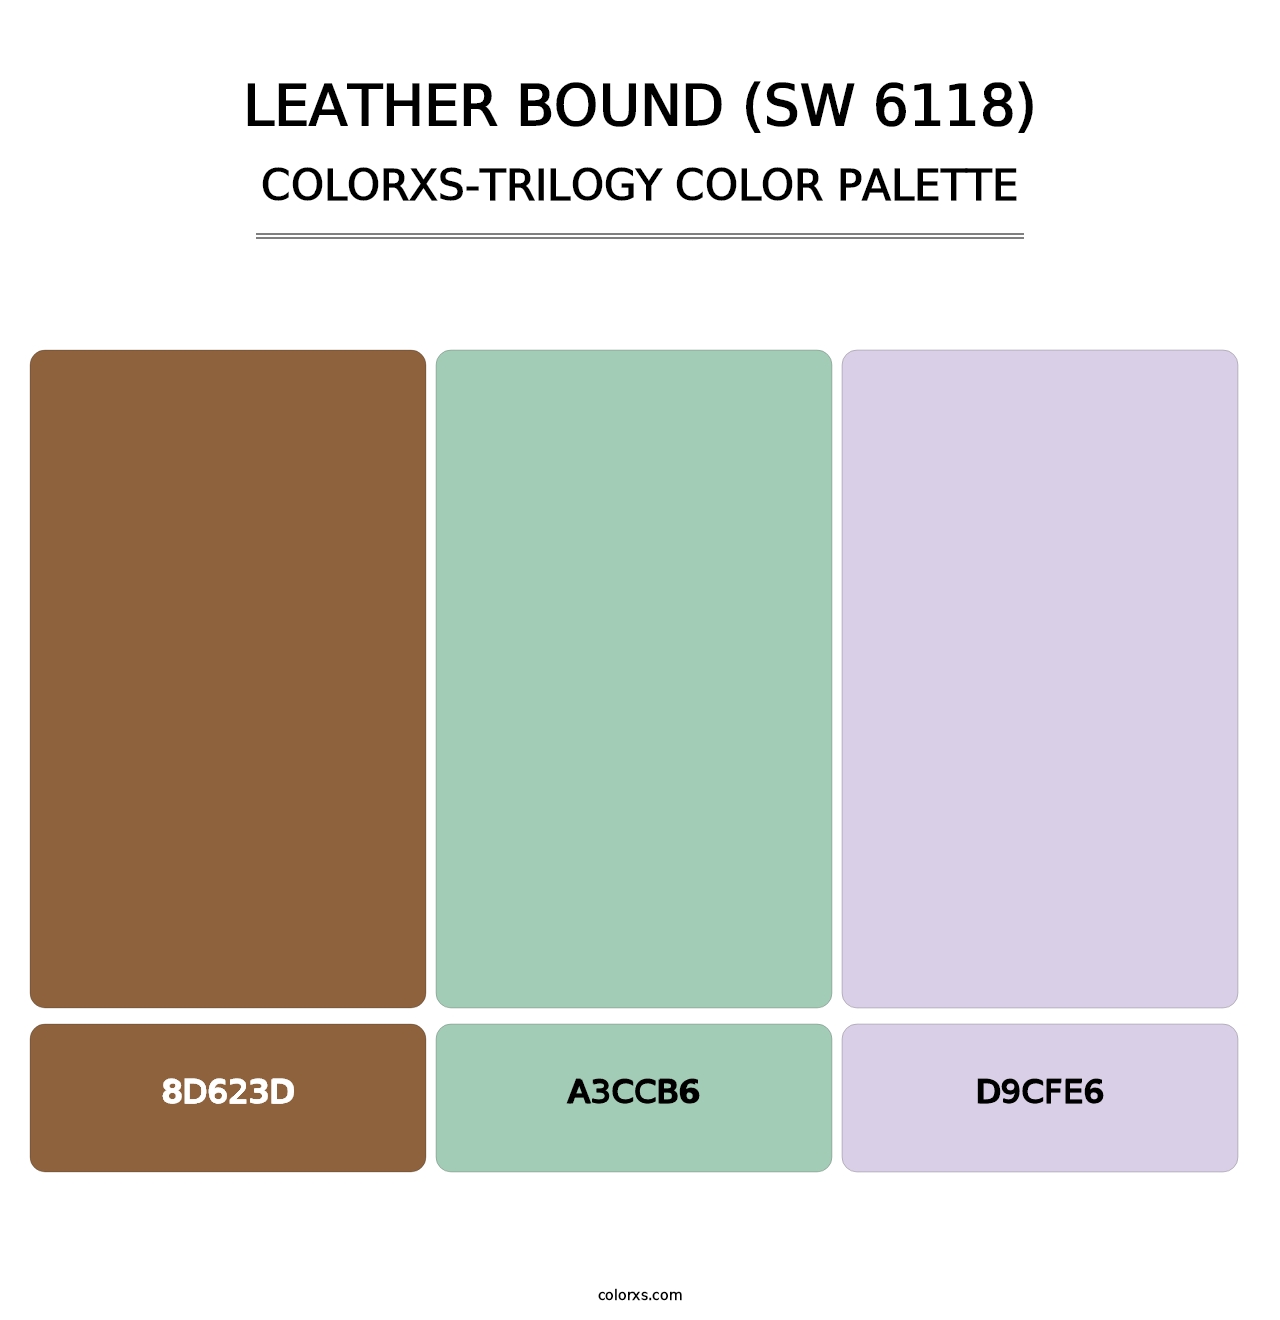 Leather Bound (SW 6118) - Colorxs Trilogy Palette